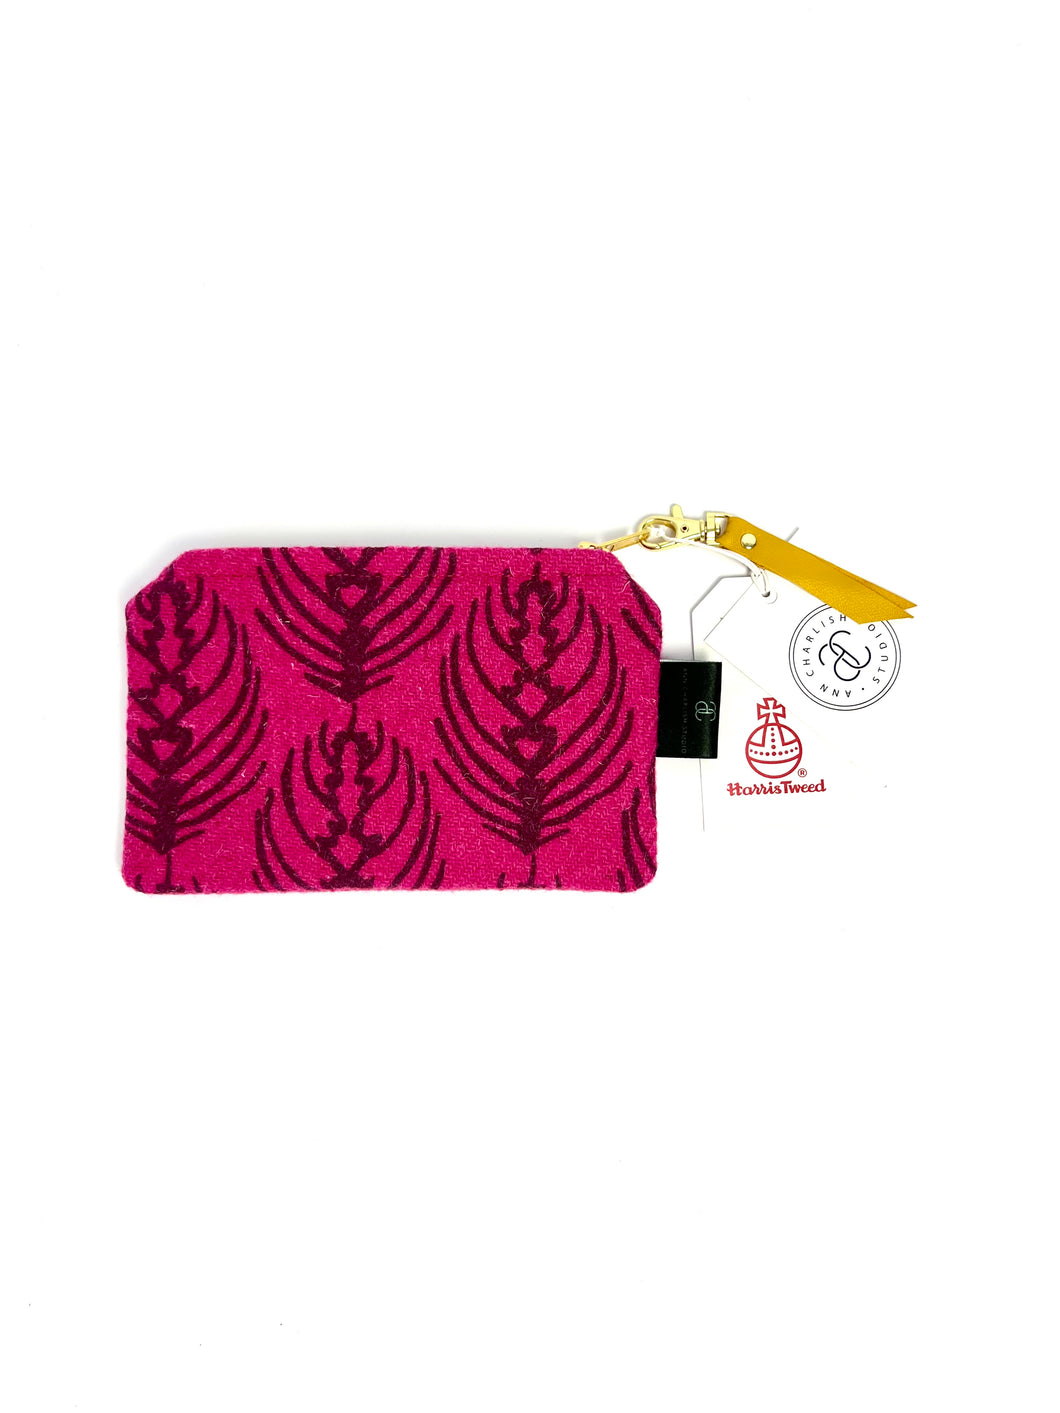 The Harley Gallery Shop // Pink tweed pouch bag by Ann Charlish